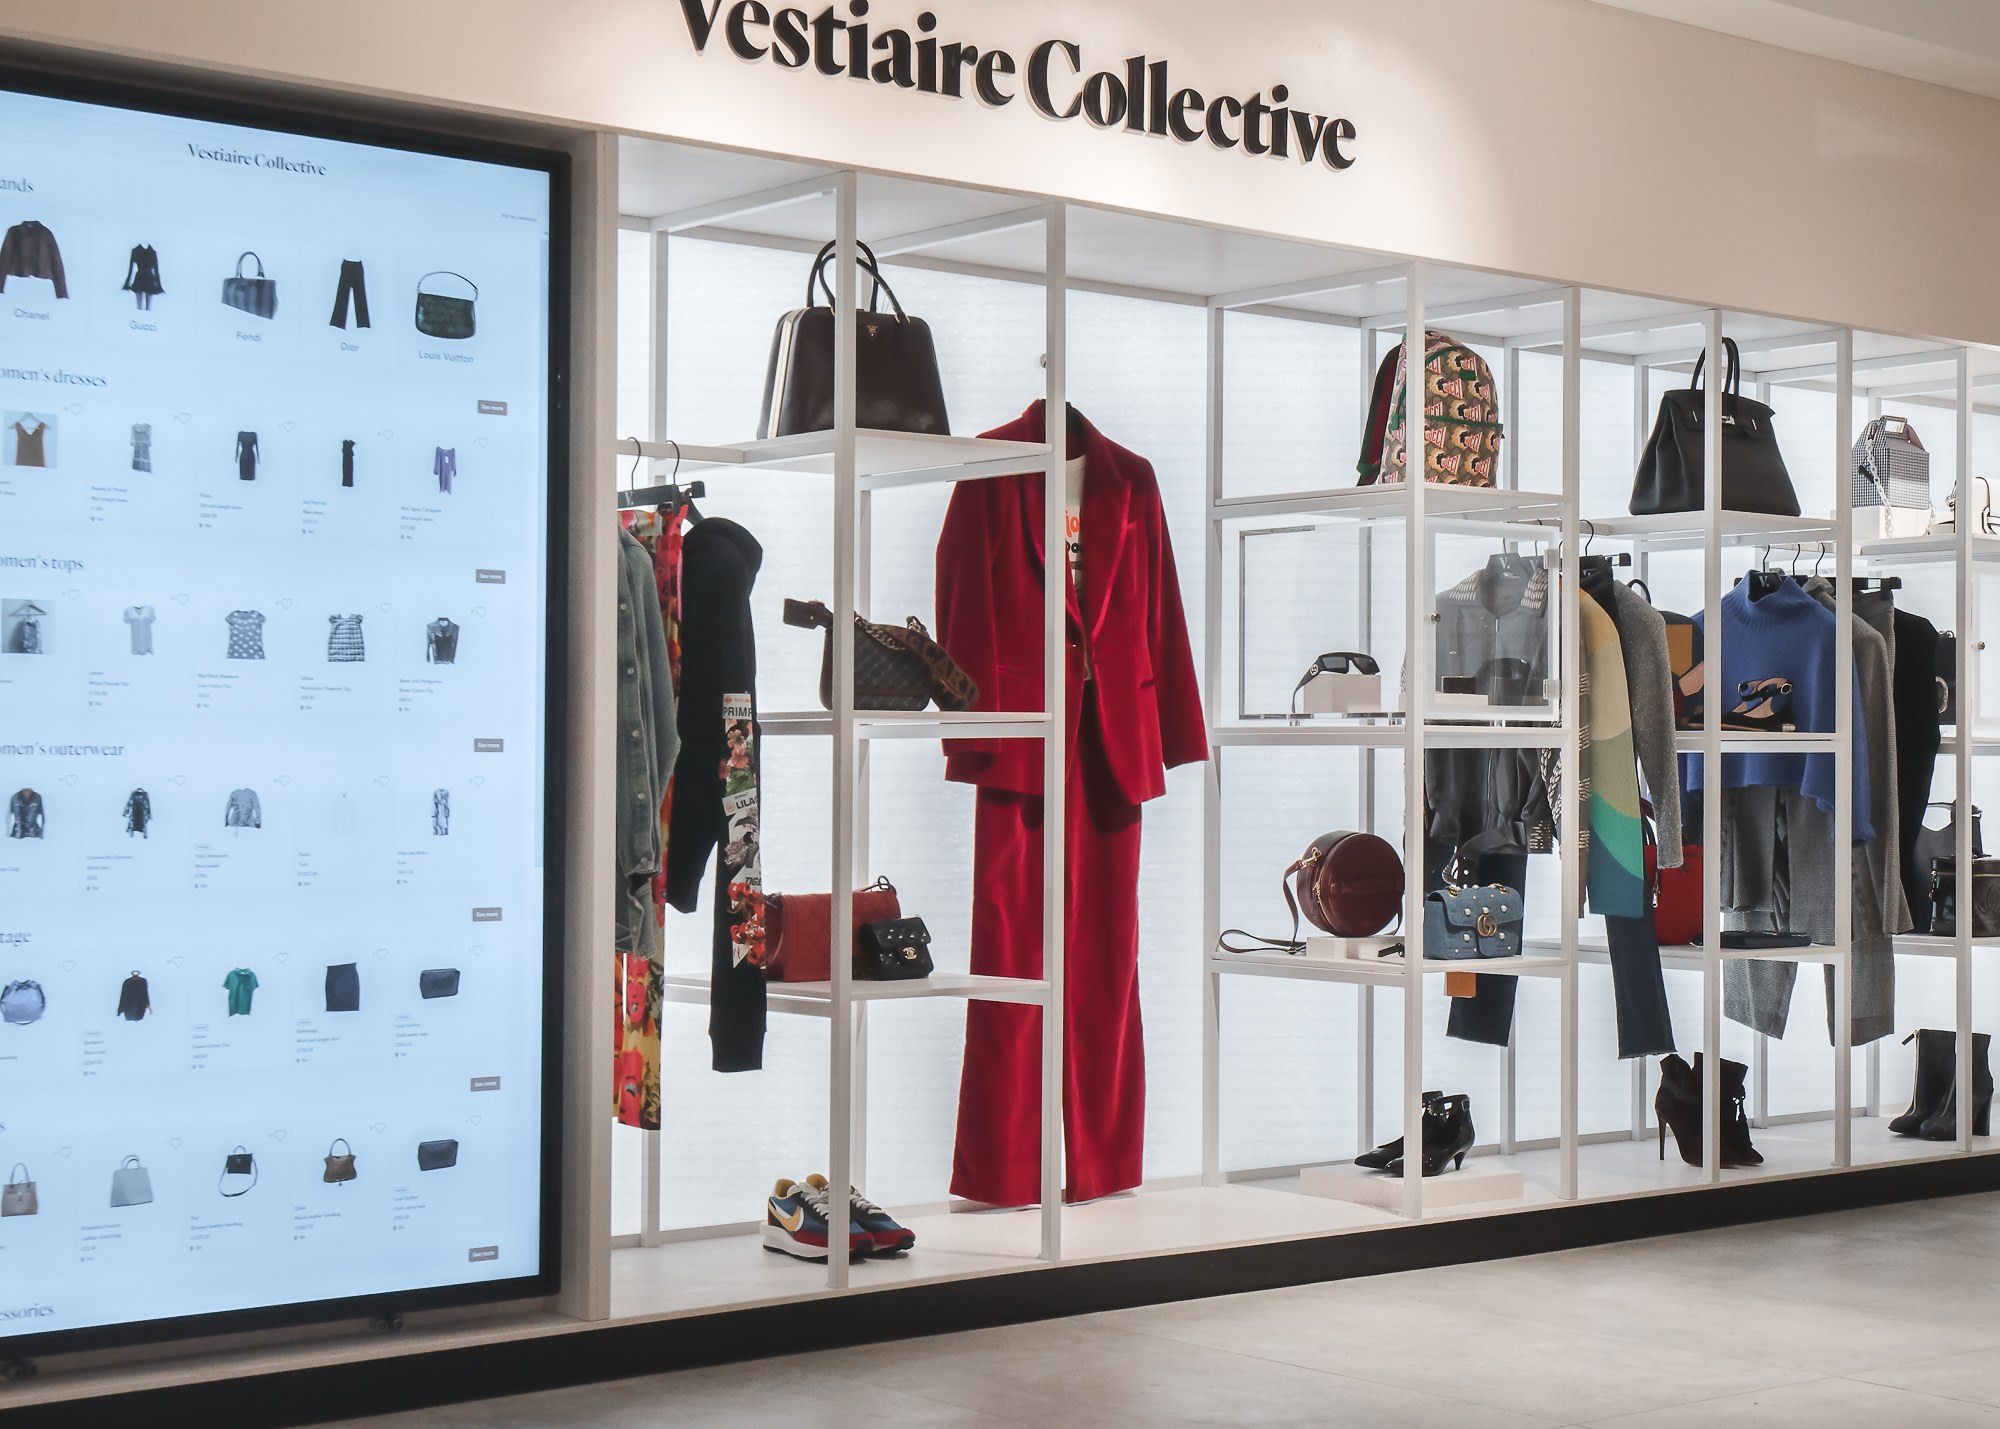 The Vestiaire Collective Business Model – How Does Vestiaire